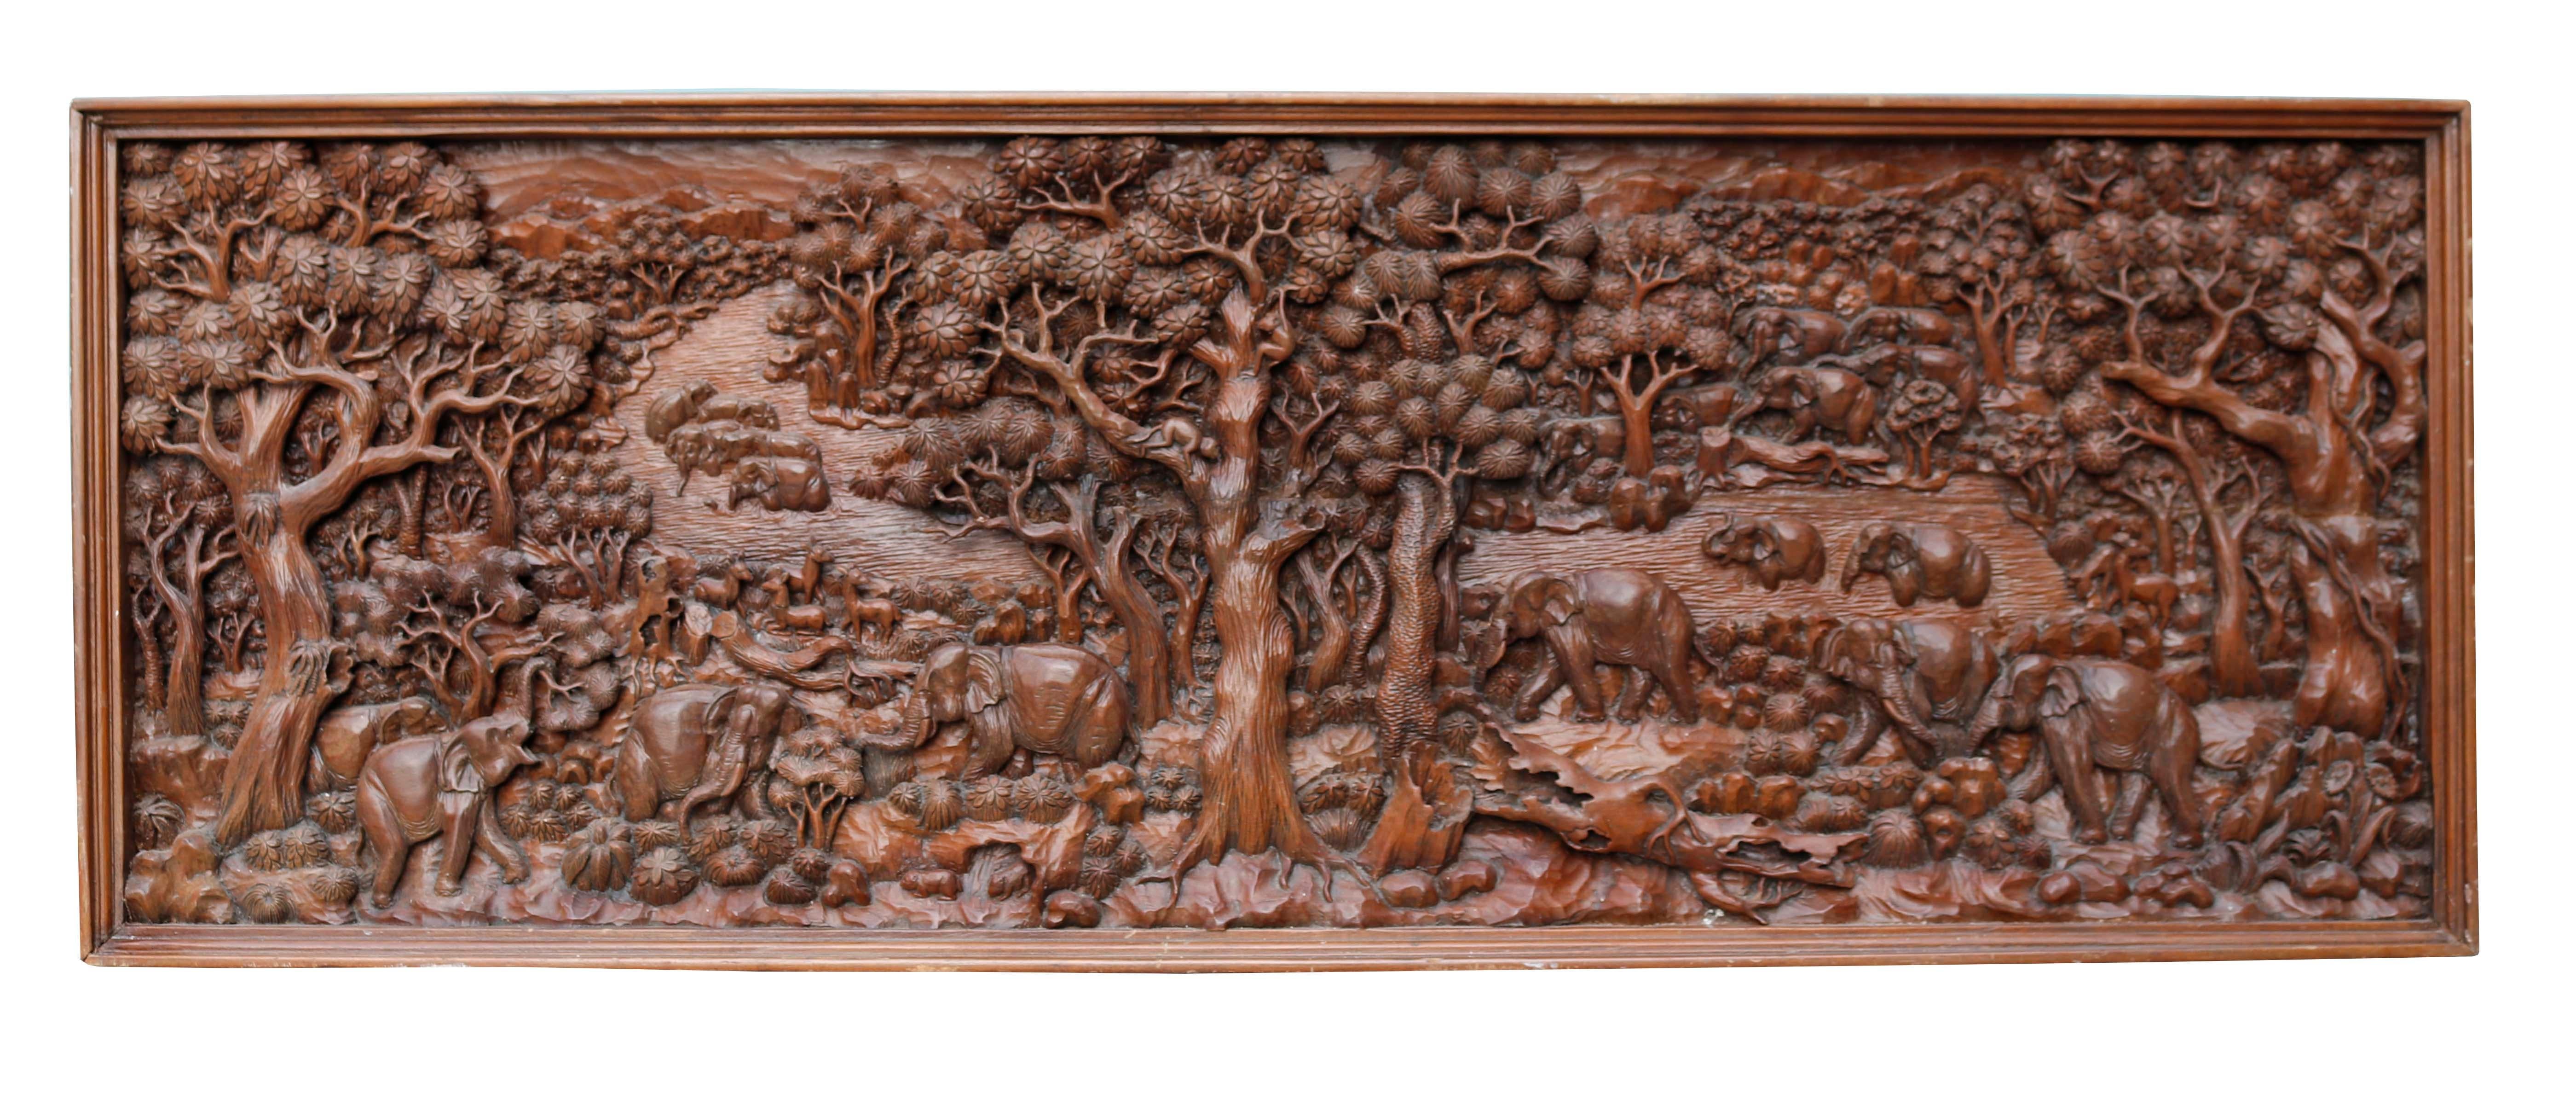 Large carved oriental wall panel. Originating in Thailand, this piece was imported to the UK by its previous owner in the 1950s. The panel depicts a jungle scene of flora and fauna. The rich colour of the wood brilliantly compliments the detail of